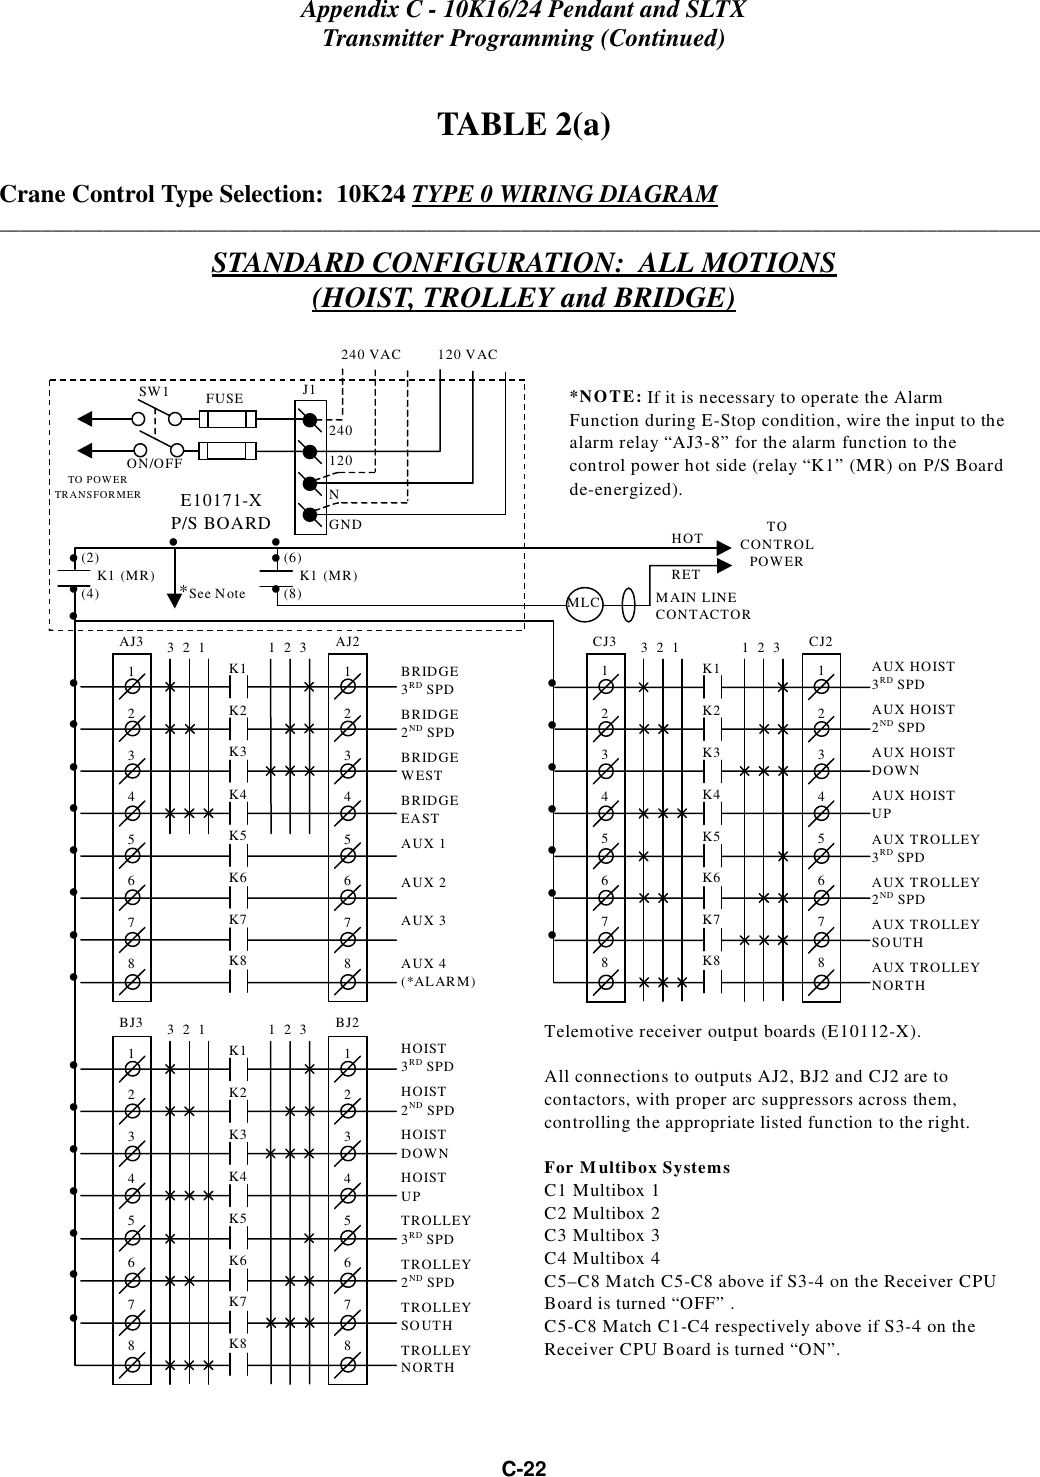 Appendix C - 10K16/24 Pendant and SLTXTransmitter Programming (Continued)C-22TABLE 2(a)Crane Control Type Selection:  10K24 TYPE 0 WIRING DIAGRAM____________________________________________________________________________________________________STANDARD CONFIGURATION:  ALL MOTIONS(HOIST, TROLLEY and BRIDGE)CJ312345678CJ212345678K1K2K3K4K5K6K7K83  2  1 1  2  3AUX HOIST3RD SPDAUX HOIST2ND SPDAUX HOISTDOWNAUX HOISTUPAUX TROLLEY3RD SPDAUX TROLLEY2ND SPDAUX TROLLEYSOUTHAUX TROLLEYNORTH• • • • • • • BJ312345678BJ212345678K1K2K3K4K5K6K7K83  2  1 1  2  3HOIST3RD SPDHOIST2ND SPDHOISTDOWNHOISTUPTROLLEY3RD SPDTROLLEY2ND SPDTROLLEYSOUTHTROLLEYNORTH• • • • • • • AJ312345678AJ212345678K1K2K3K4K5K6K7K83  2  1 1  2  3BRIDGE3RD SPDBRIDGE2ND SPDBRIDGEWESTBRIDGEEASTAUX 1AUX 2AUX 3AUX 4(*ALARM)• • • • • • • • *NOTE: If it is necessary to operate the AlarmFunction during E-Stop condition, wire the input to thealarm relay “AJ3-8” for the alarm function to thecontrol power hot side (relay “K1” (MR) on P/S Boardde-energized).Telemotive receiver output boards (E10112-X).All connections to outputs AJ2, BJ2 and CJ2 are tocontactors, with proper arc suppressors across them,controlling the appropriate listed function to the right.For Multibox SystemsC1 Multibox 1C2 Multibox 2C3 Multibox 3C4 Multibox 4C5–C8 Match C5-C8 above if S3-4 on the Receiver CPUBoard is turned “OFF” .C5-C8 Match C1-C4 respectively above if S3-4 on theReceiver CPU Board is turned “ON”.240 VAC         120 VACSW1ON/OFFTO POWERTRANSFORMER E10171-XP/S BOARDMAIN LINECONTACTORTOCONTROLPOWERMLCHOTRET(2)    K1   (MR)(4)• • • *See Note• 240120FUSE J1NGND(6)    K1   (MR)(8)• • • 